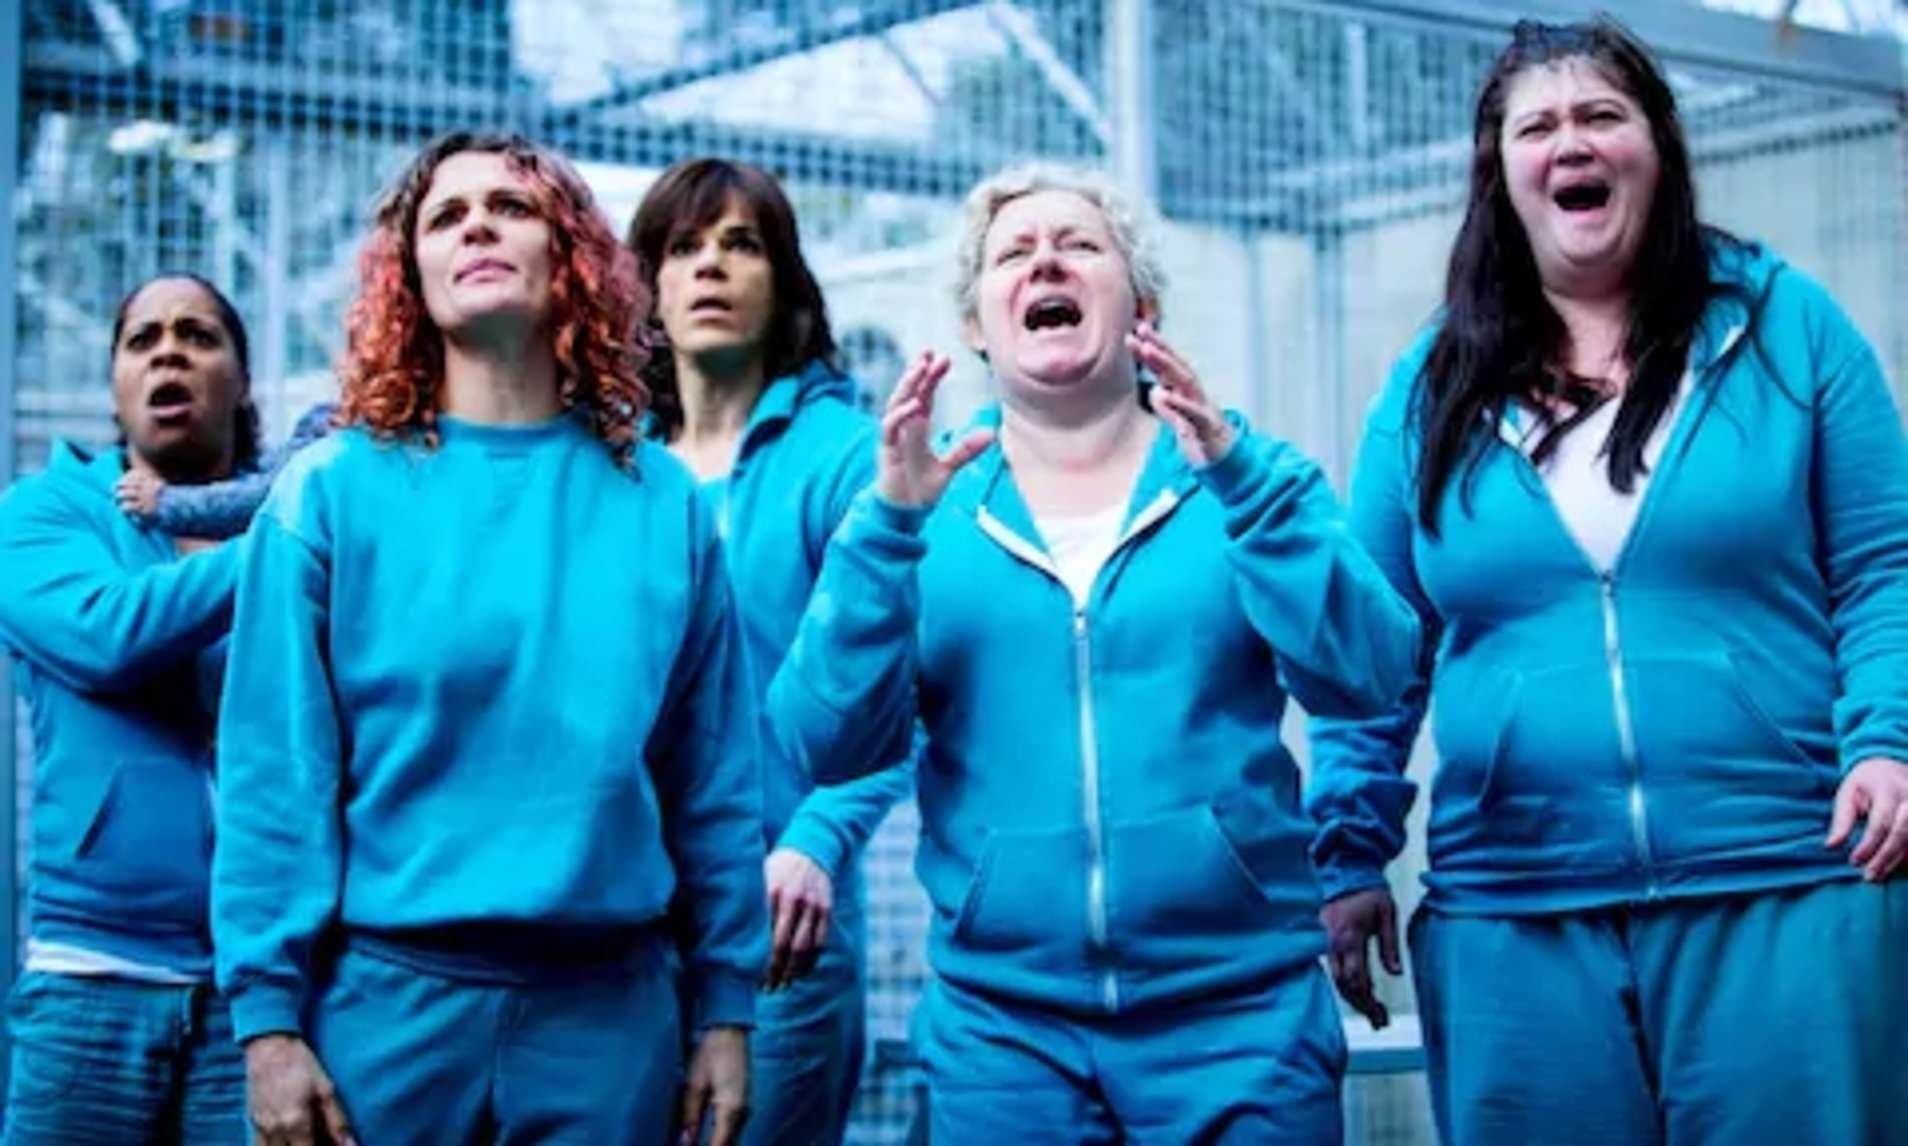 the inmates of wentworth reacting to something offscreen